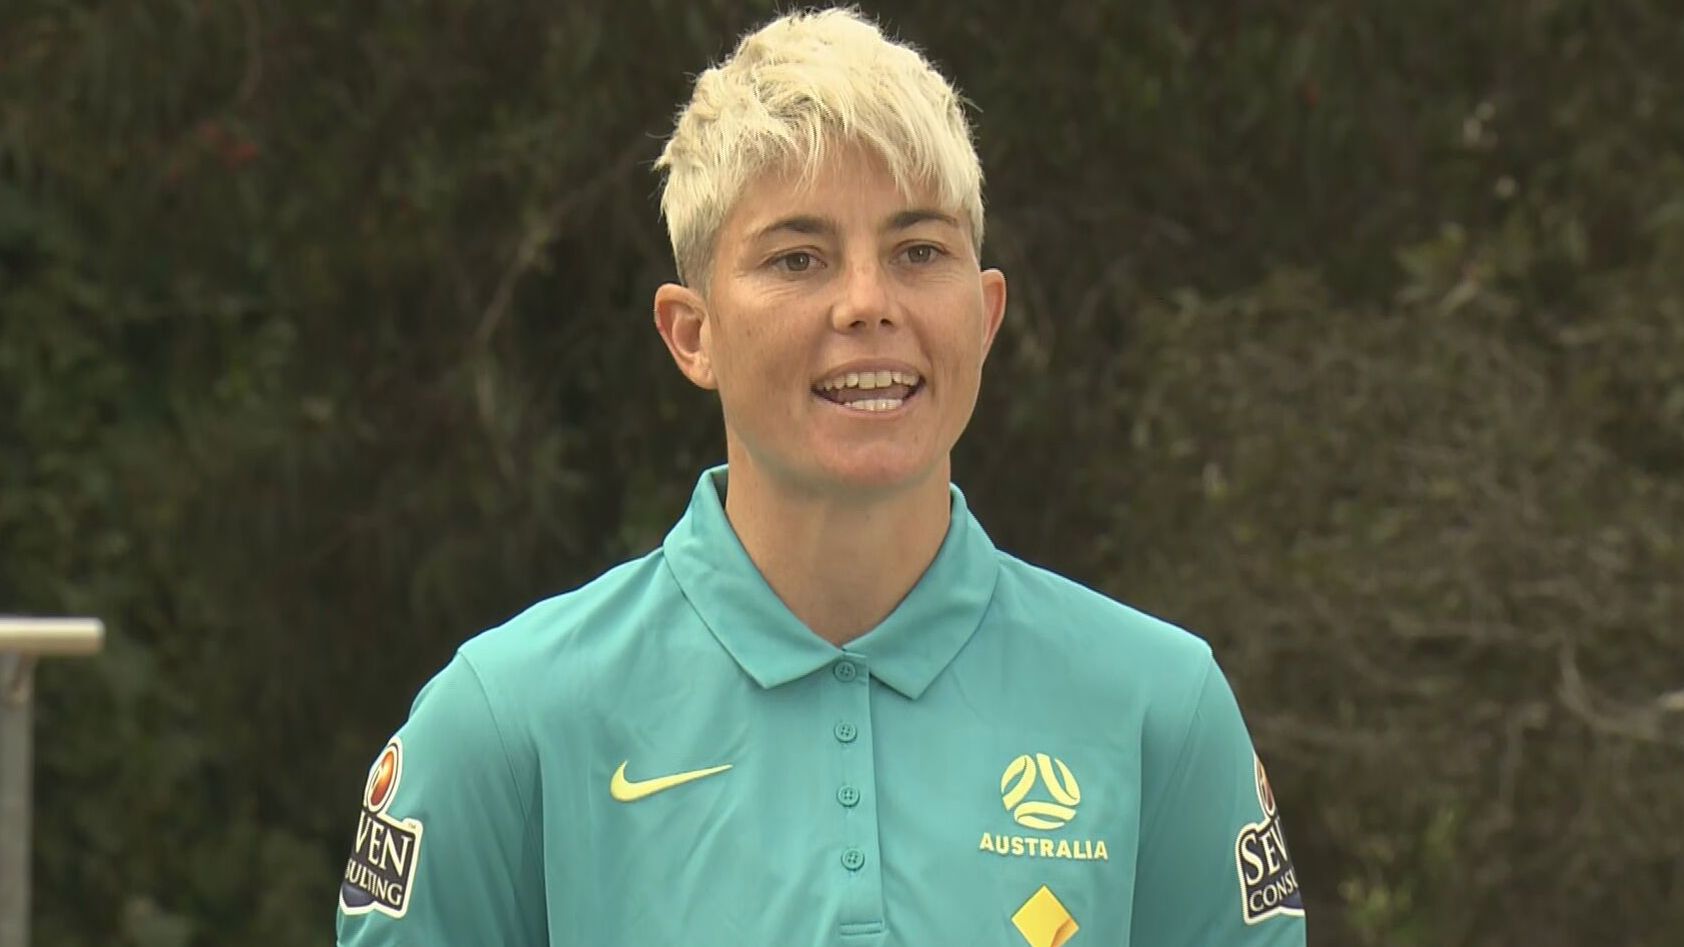 'Couldn't really use the word mental health': Why Matildas star retired five years ago